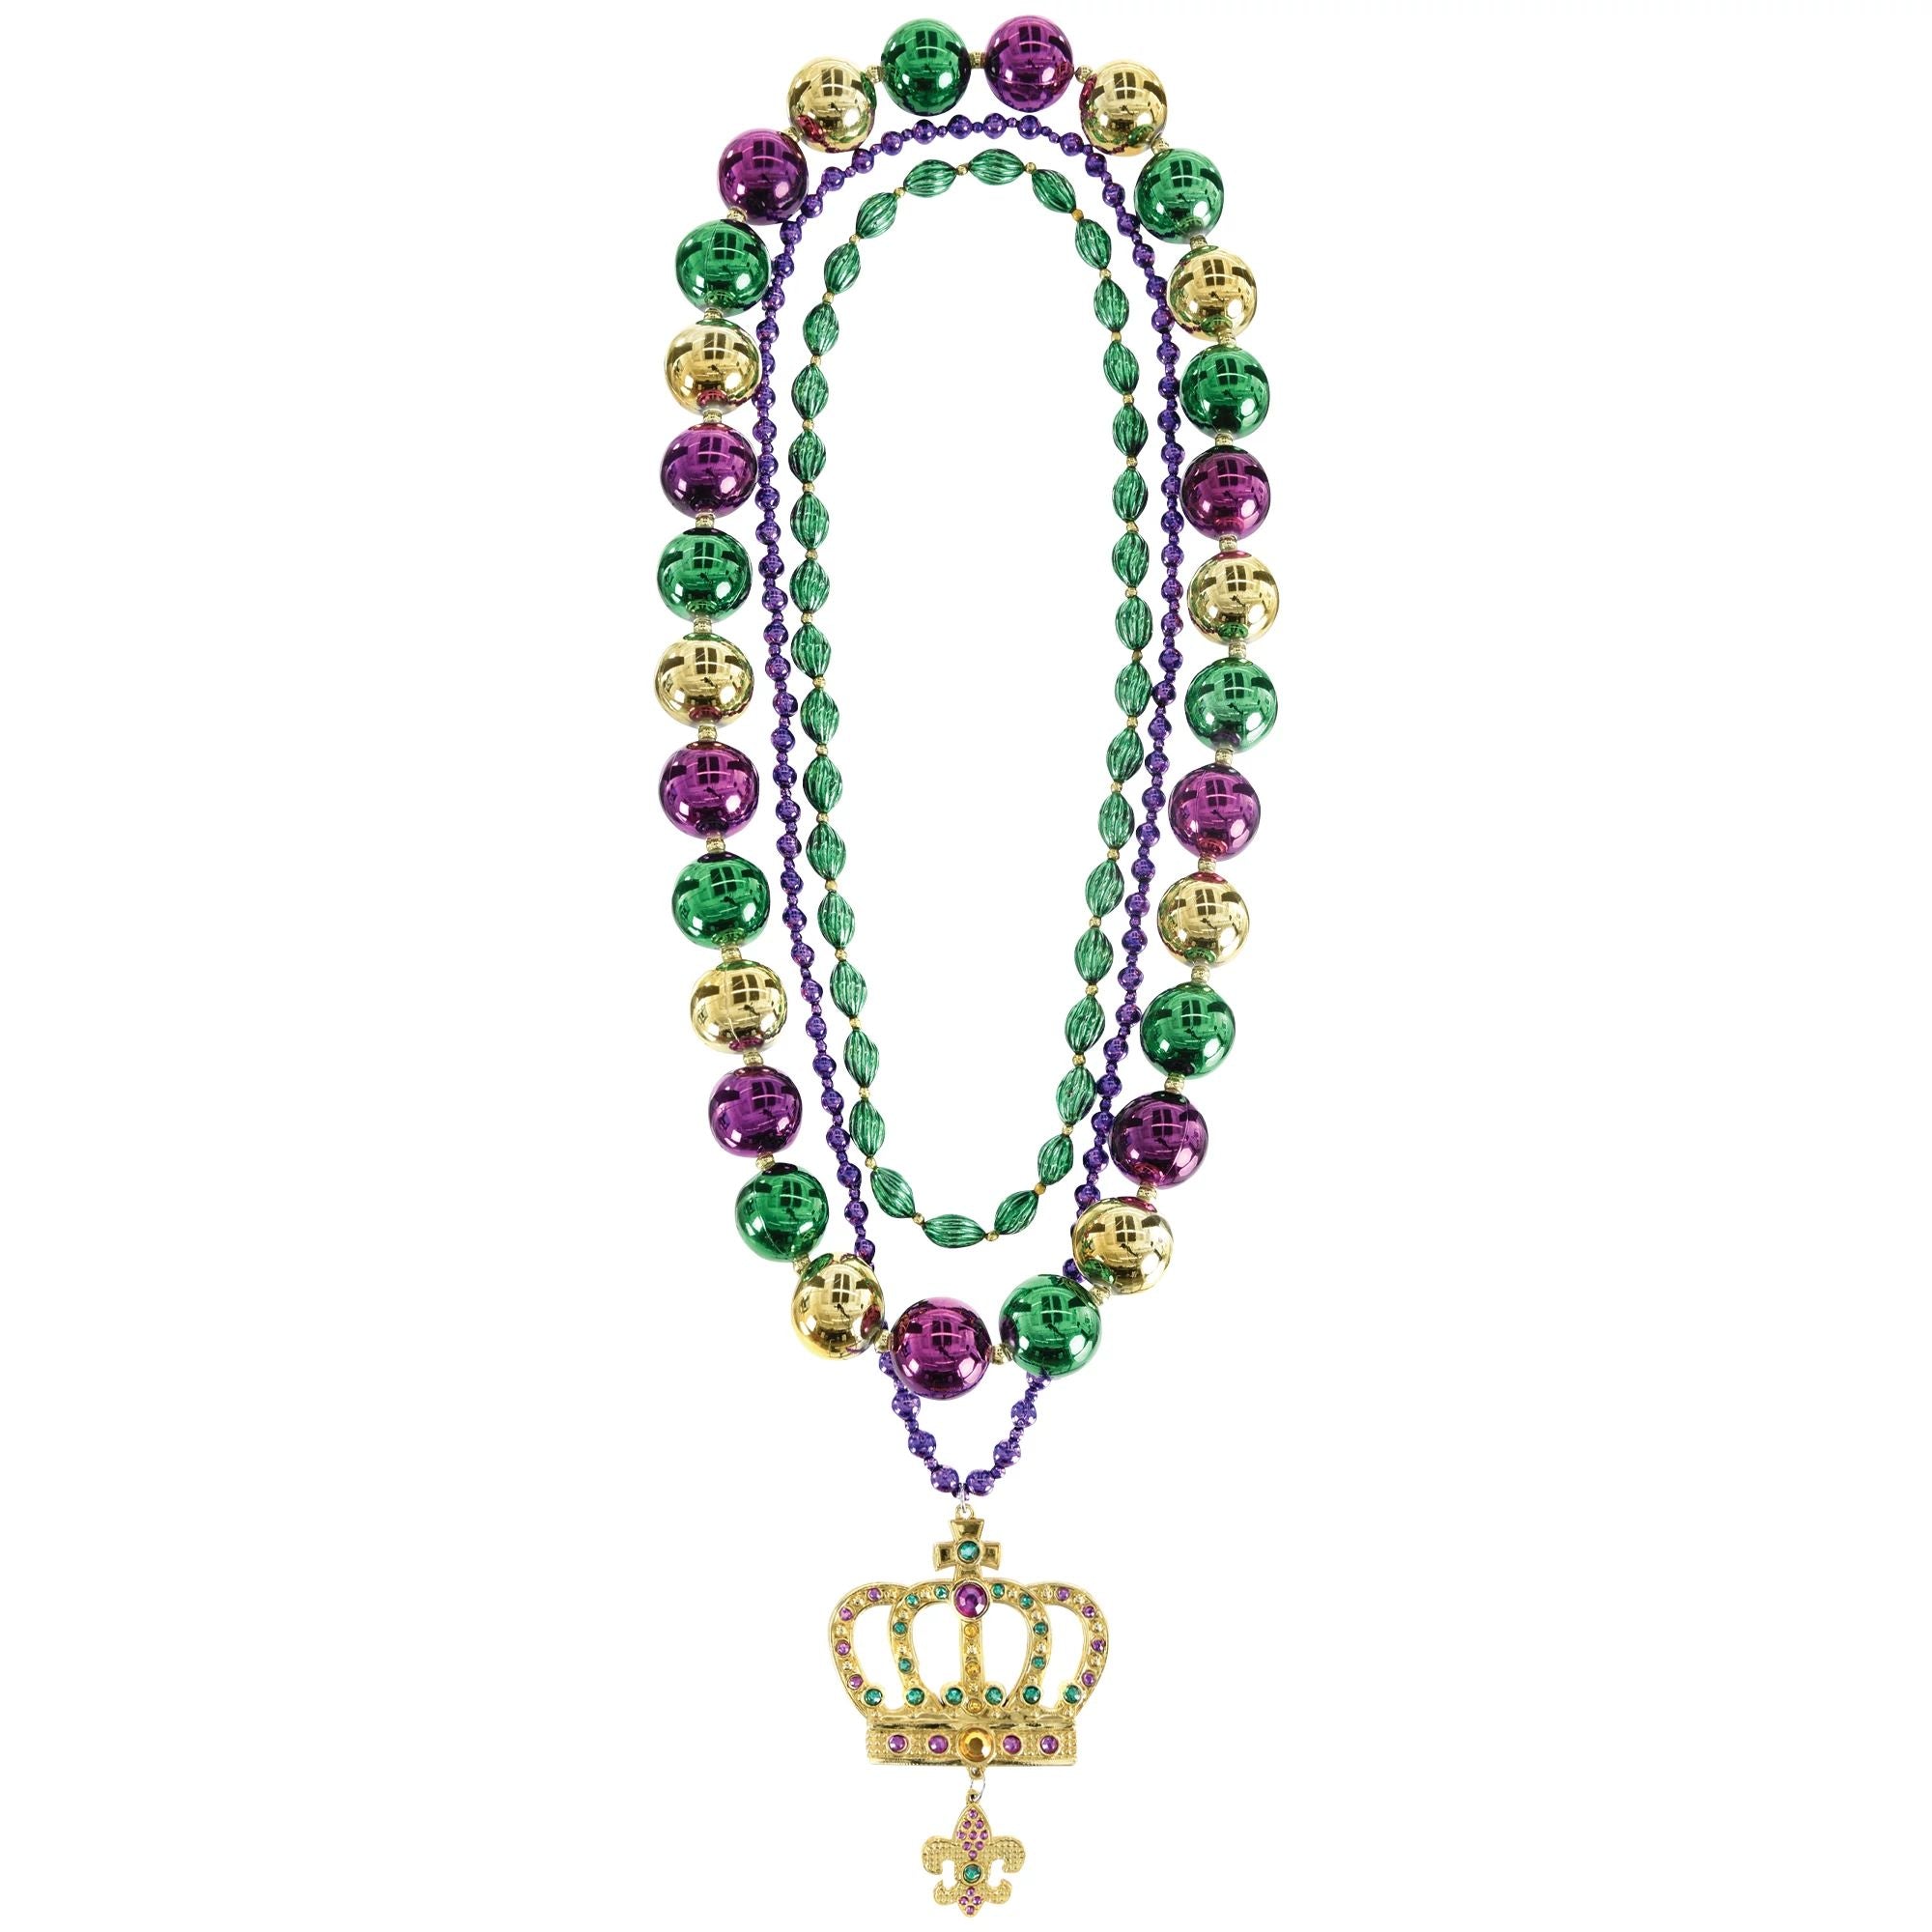 Mardi Gras Layered Deluxe Crown Pendant Necklace